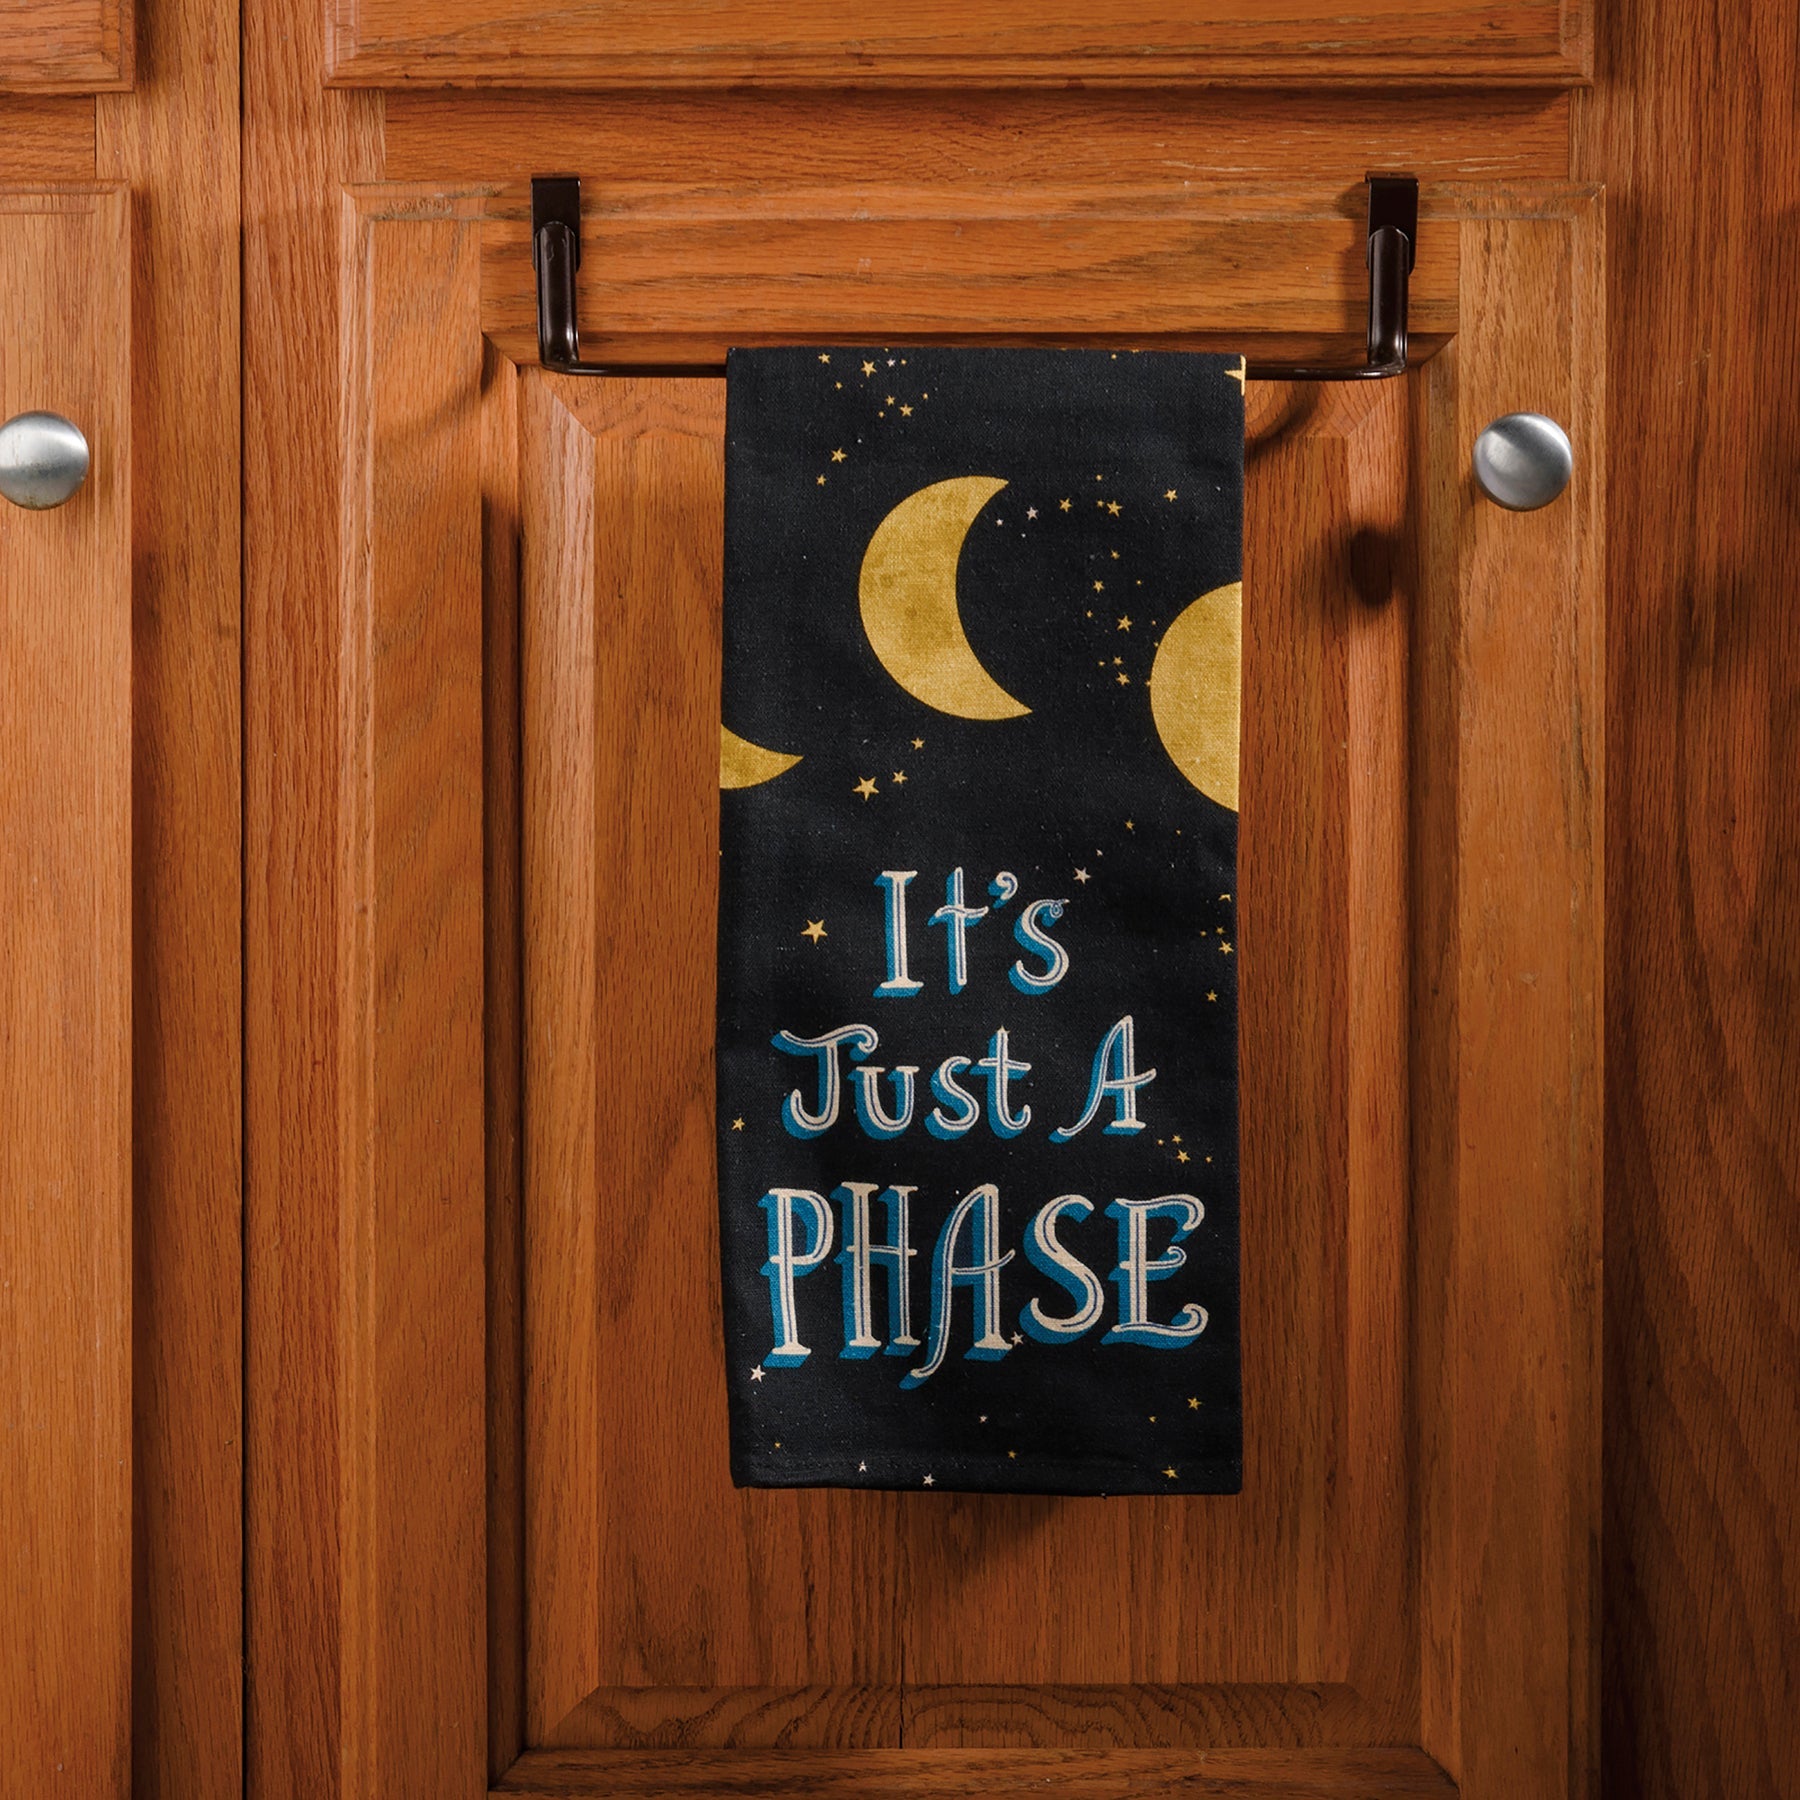 It's Just A Phase Kitchen Towel | Cotton Dish Towel | 18" x 28"